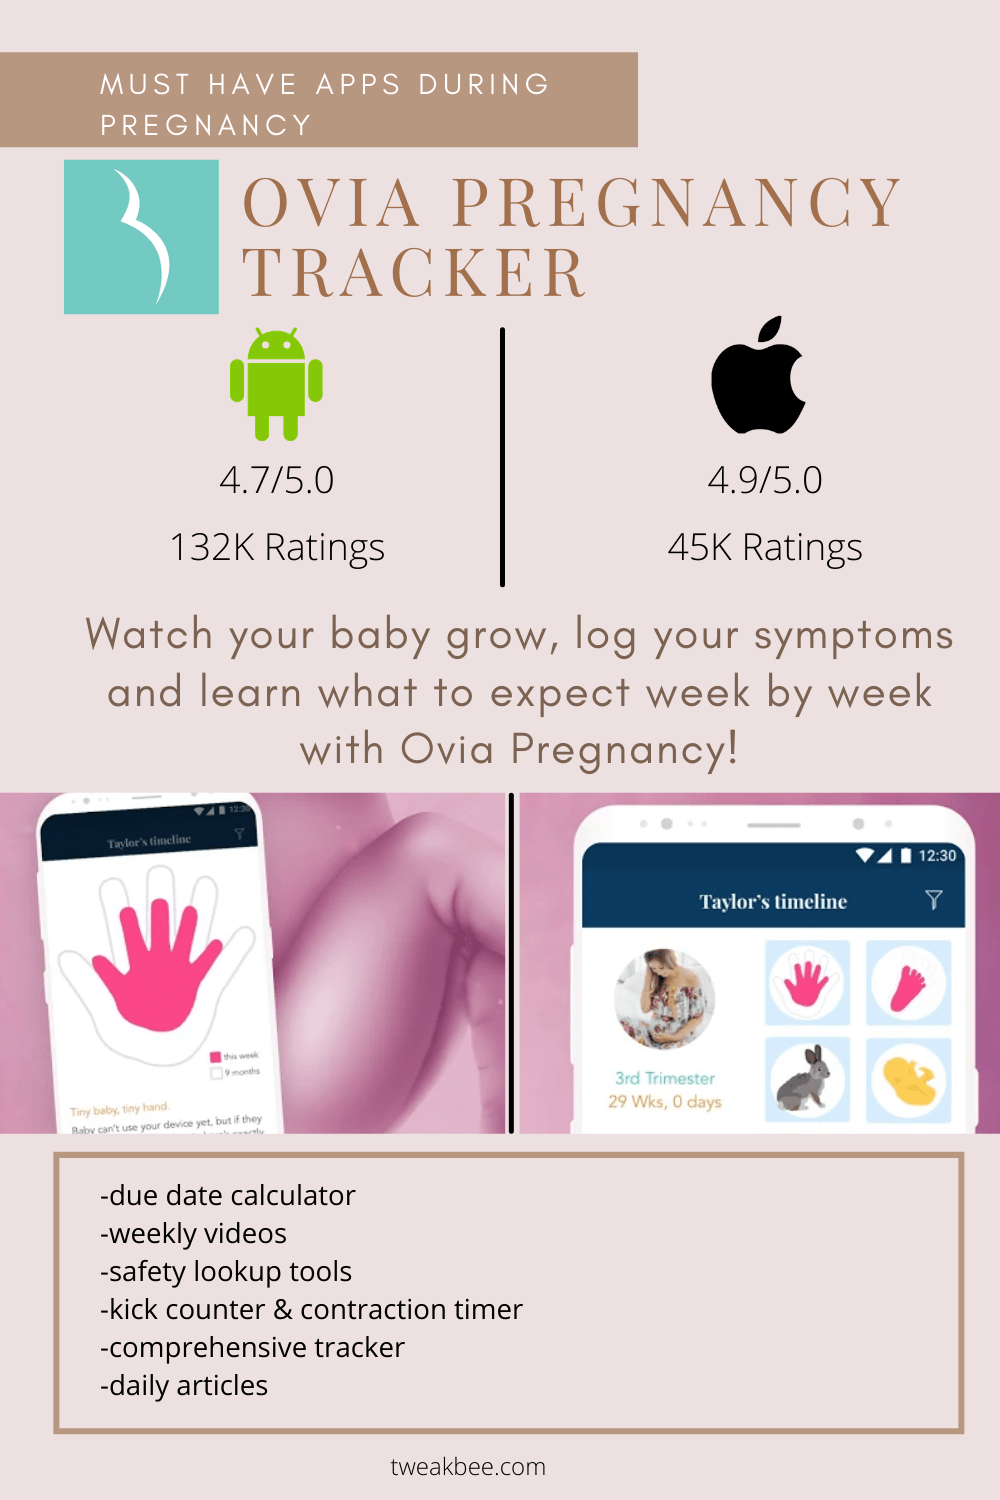 Ovia Pregnancy app Must Have Apps During Pregnancy